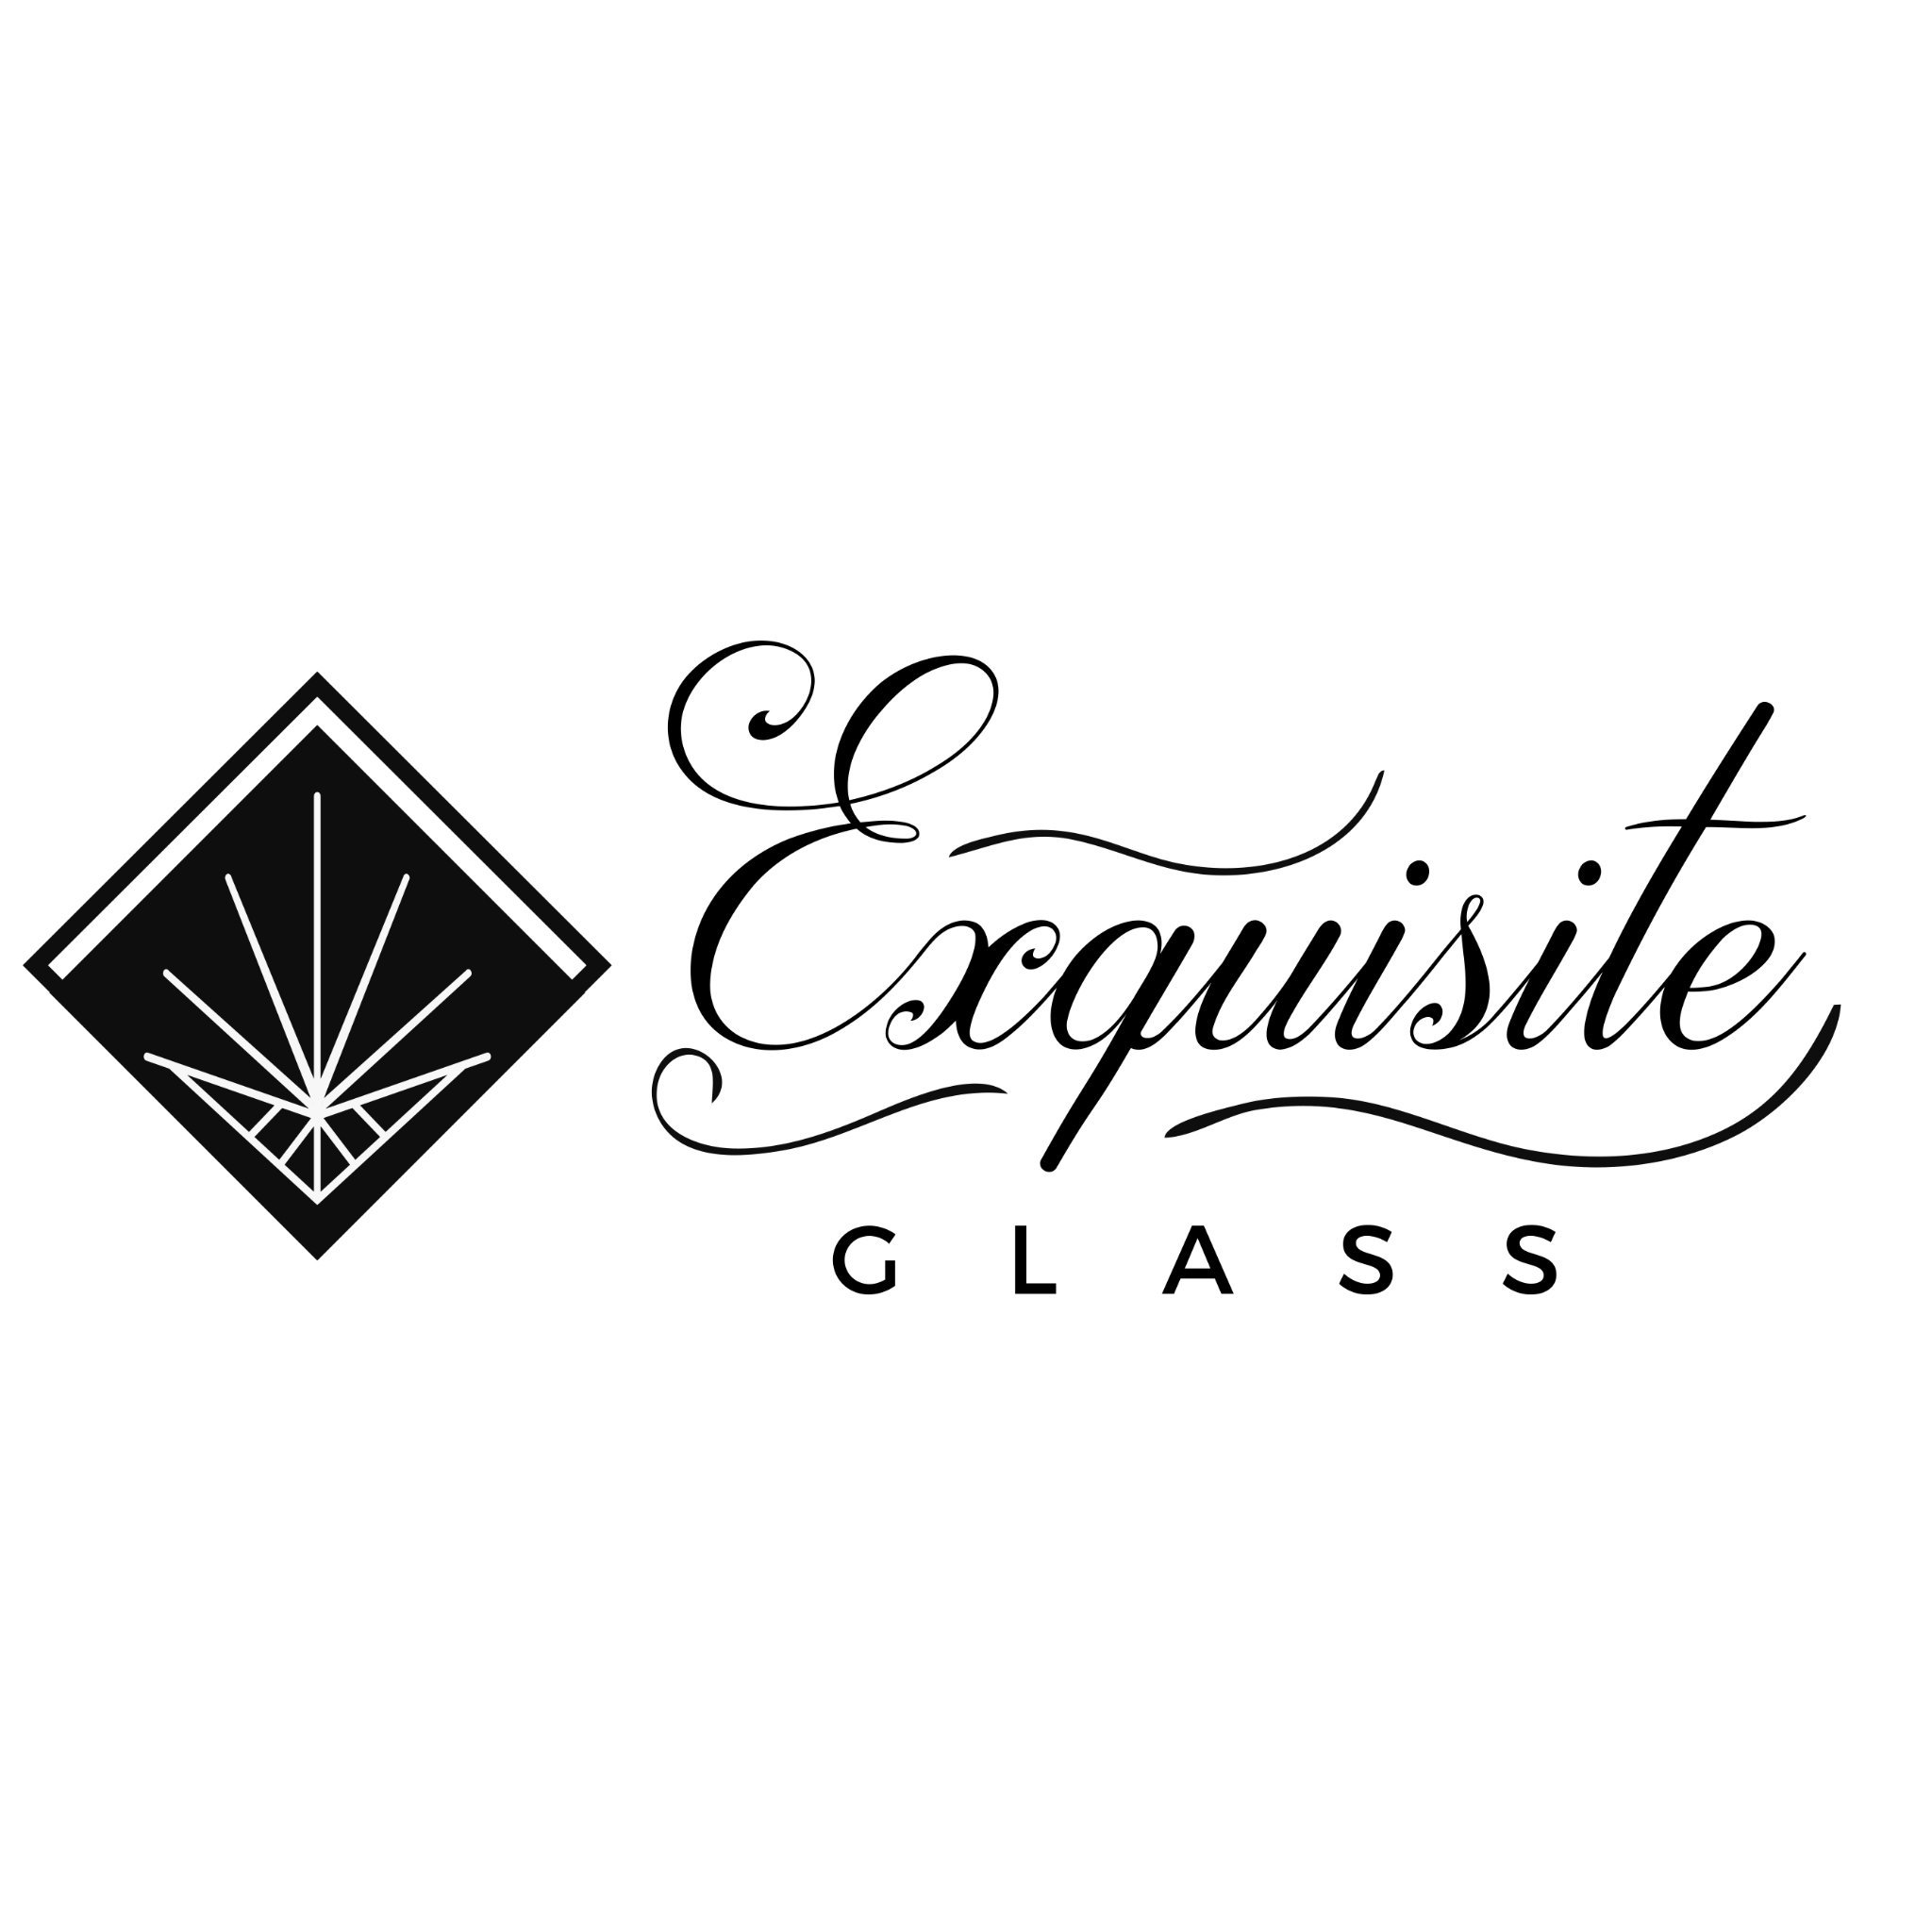 Exquisite Glass is a company specialising in luxury hand crafted crystal glass. We offer comprehensive range of  decorative coloured and clear drinkware.